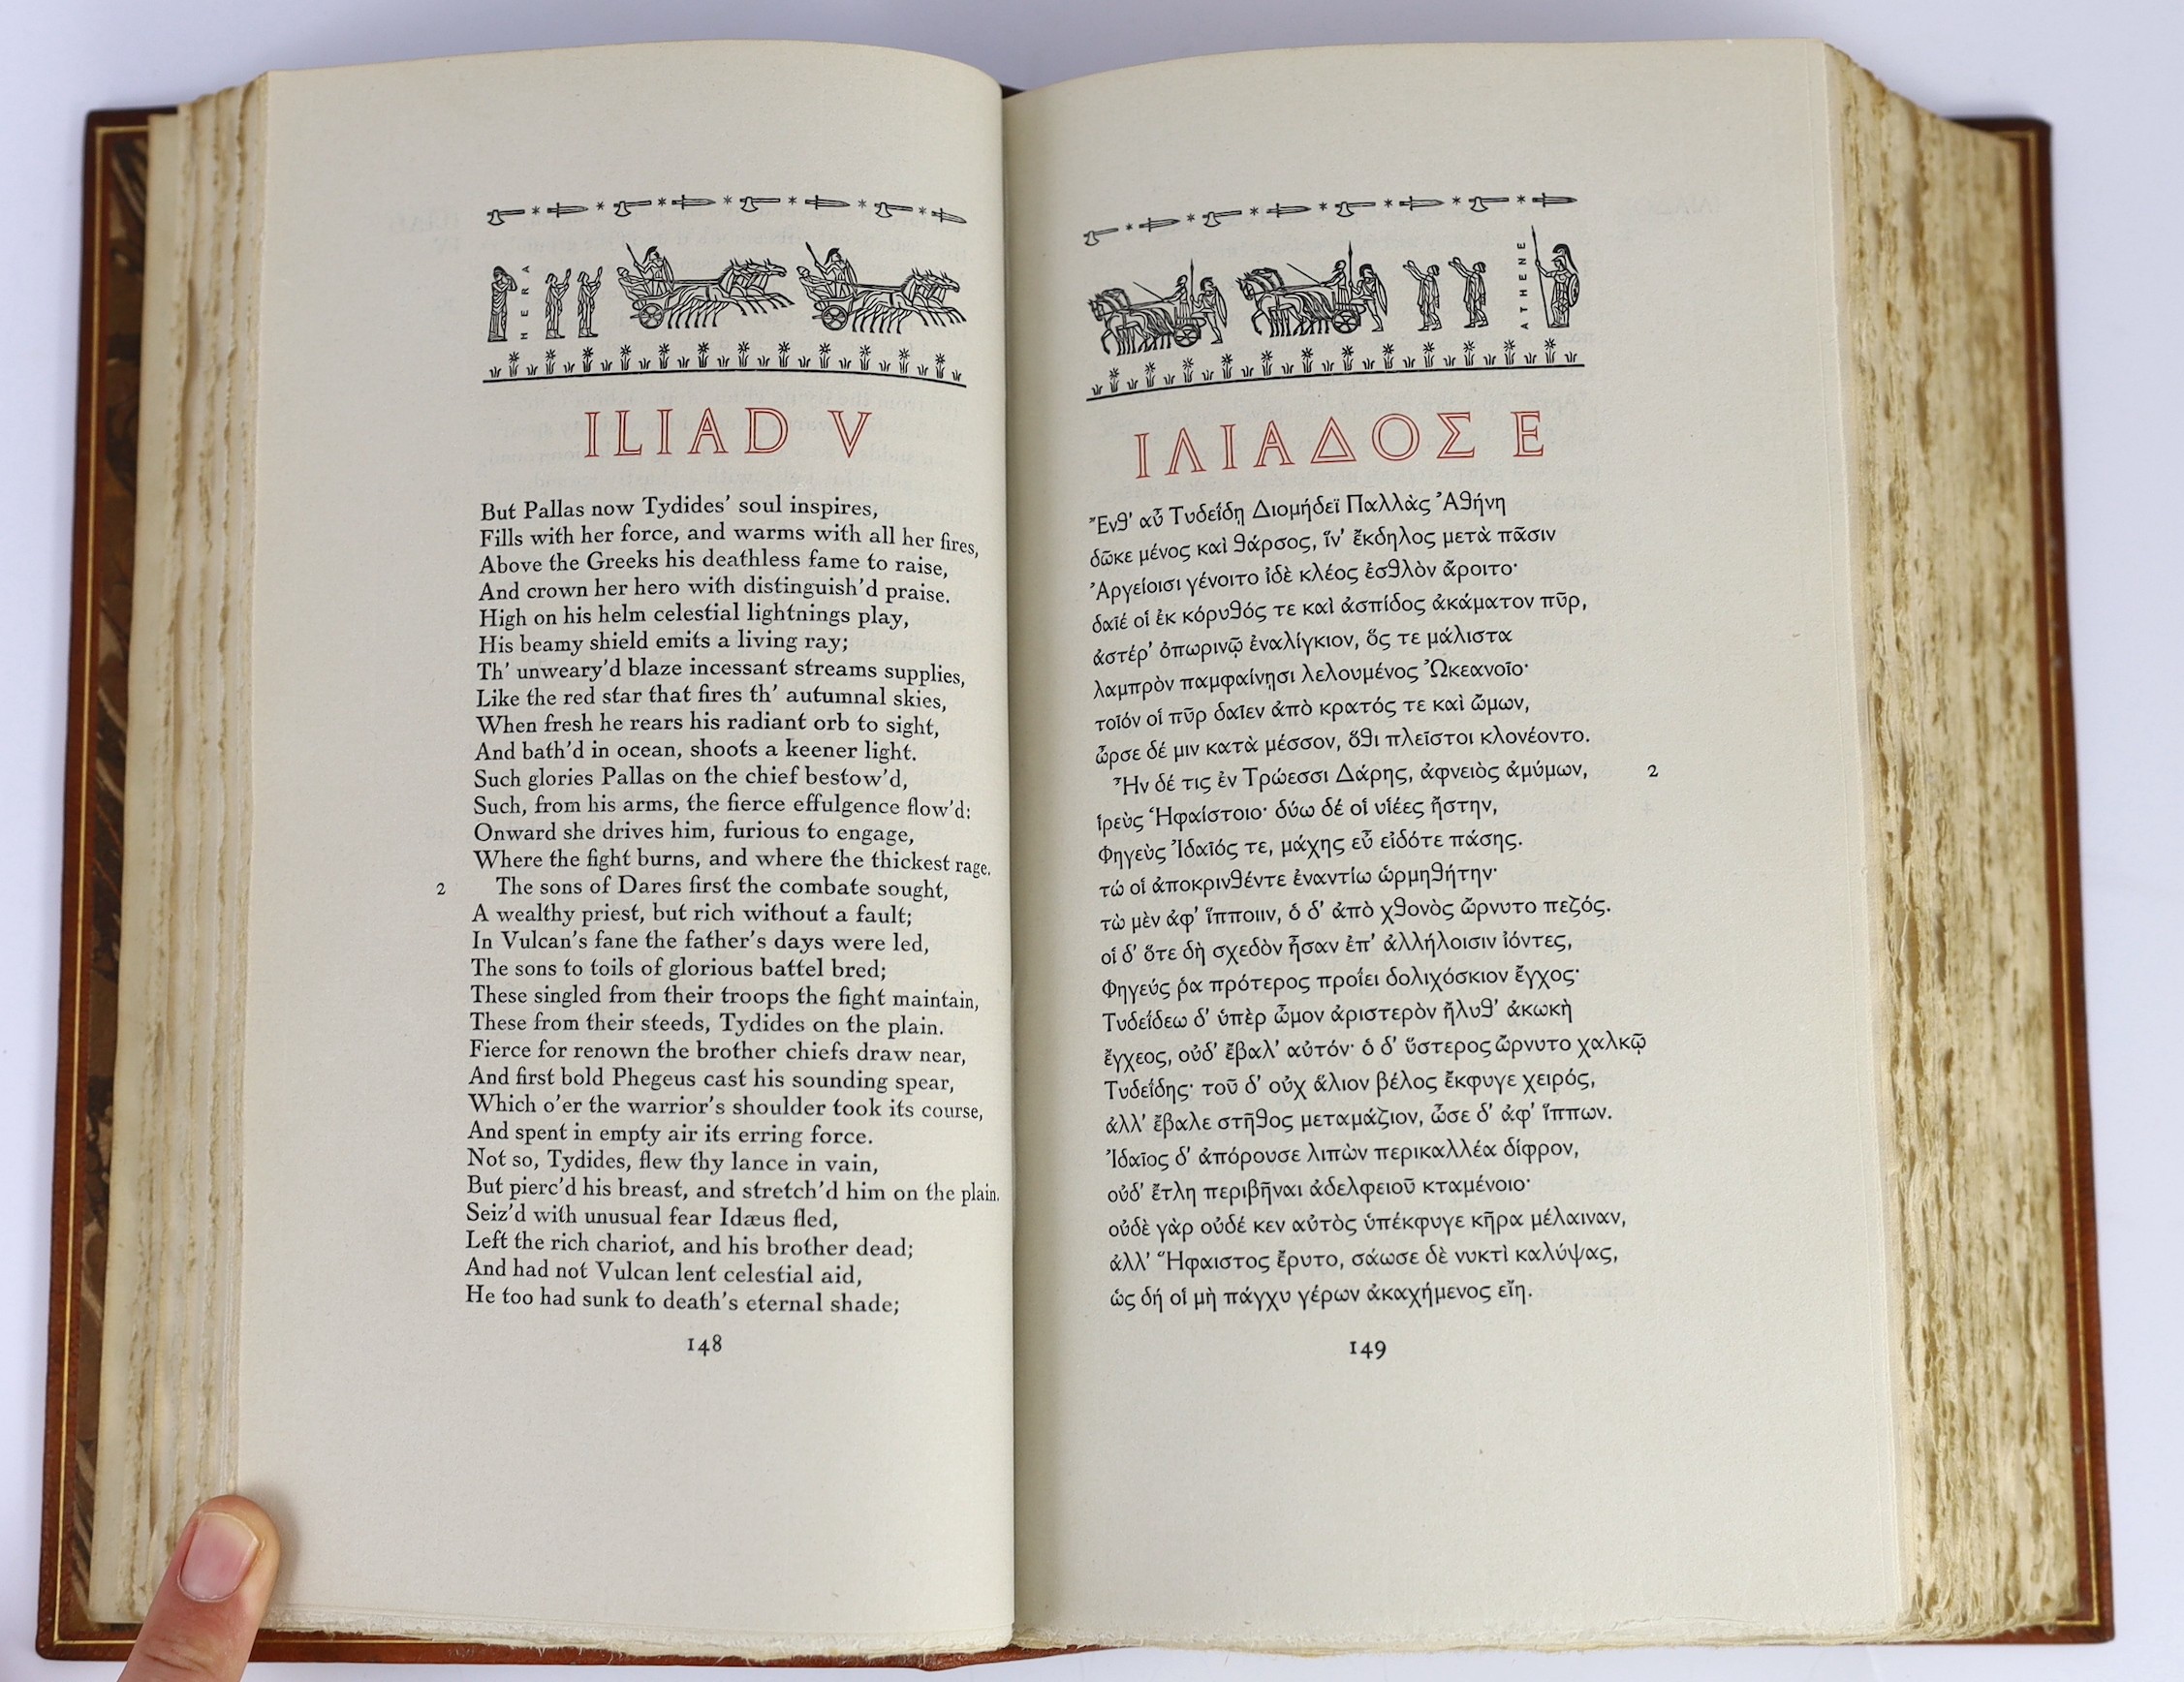 Nonesuch Press - London - Homer - The Iliad [and] The Odyssey, one of 1450 & 1300, 2 vols, translated by Alexander Pope, 8vo, original orange Niger gilt, wood-engraved head pieces by Rudolf Koch, parallel text in Greek &